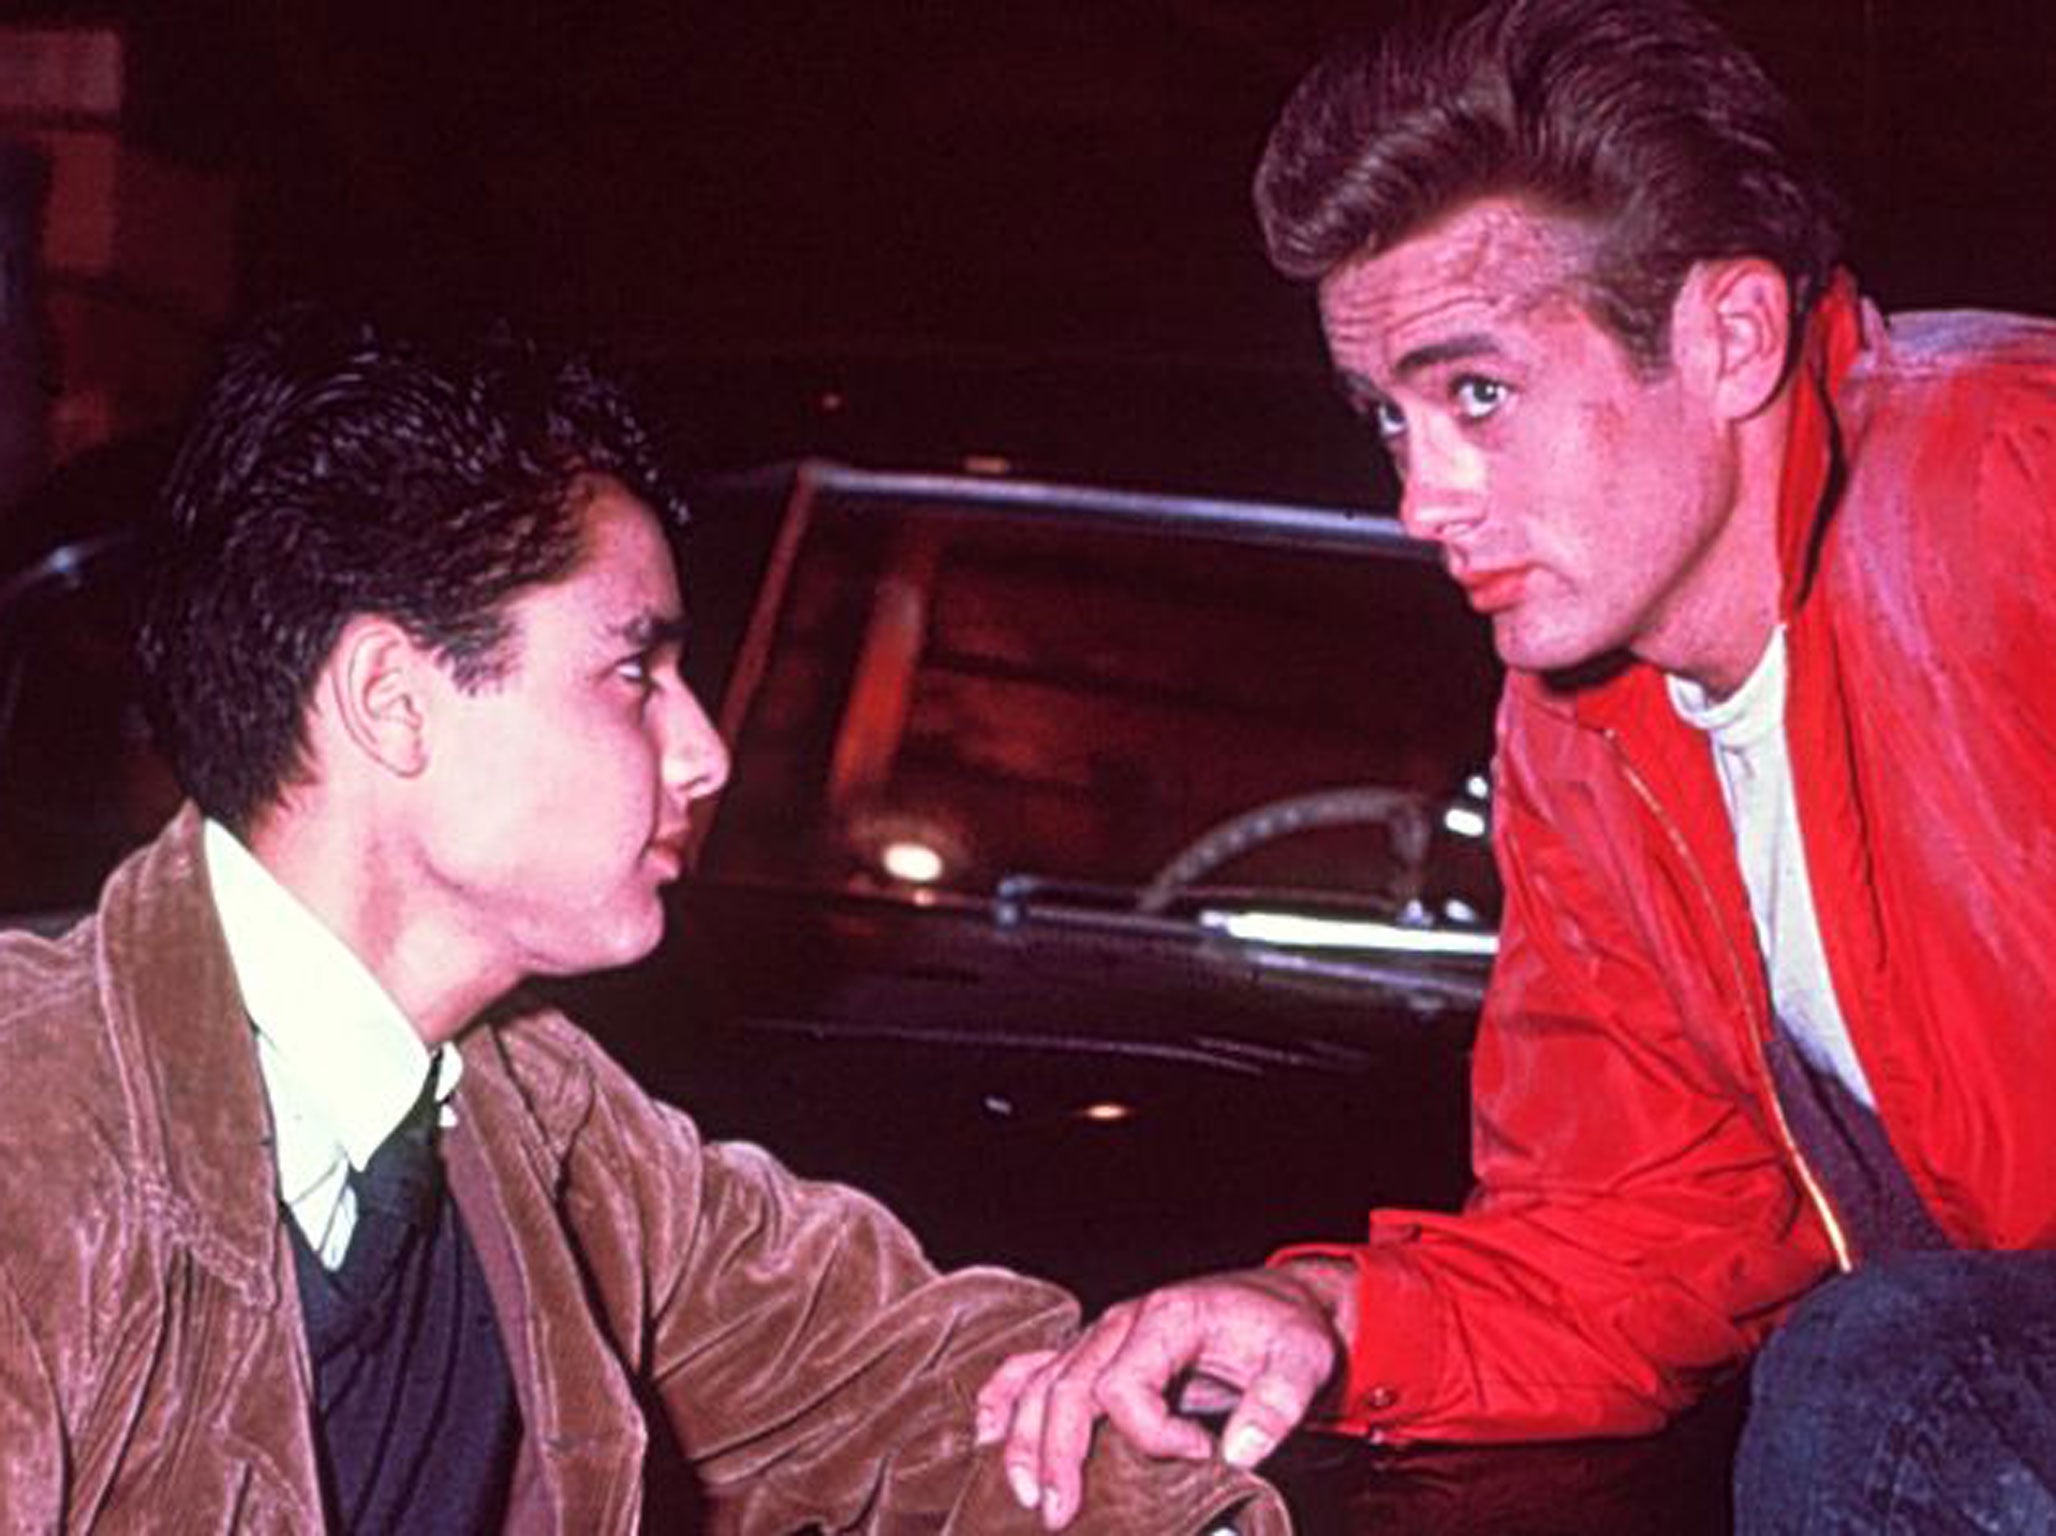 Seeing red: James Dean with Sal Mineo in 'Rebel without a Cause'